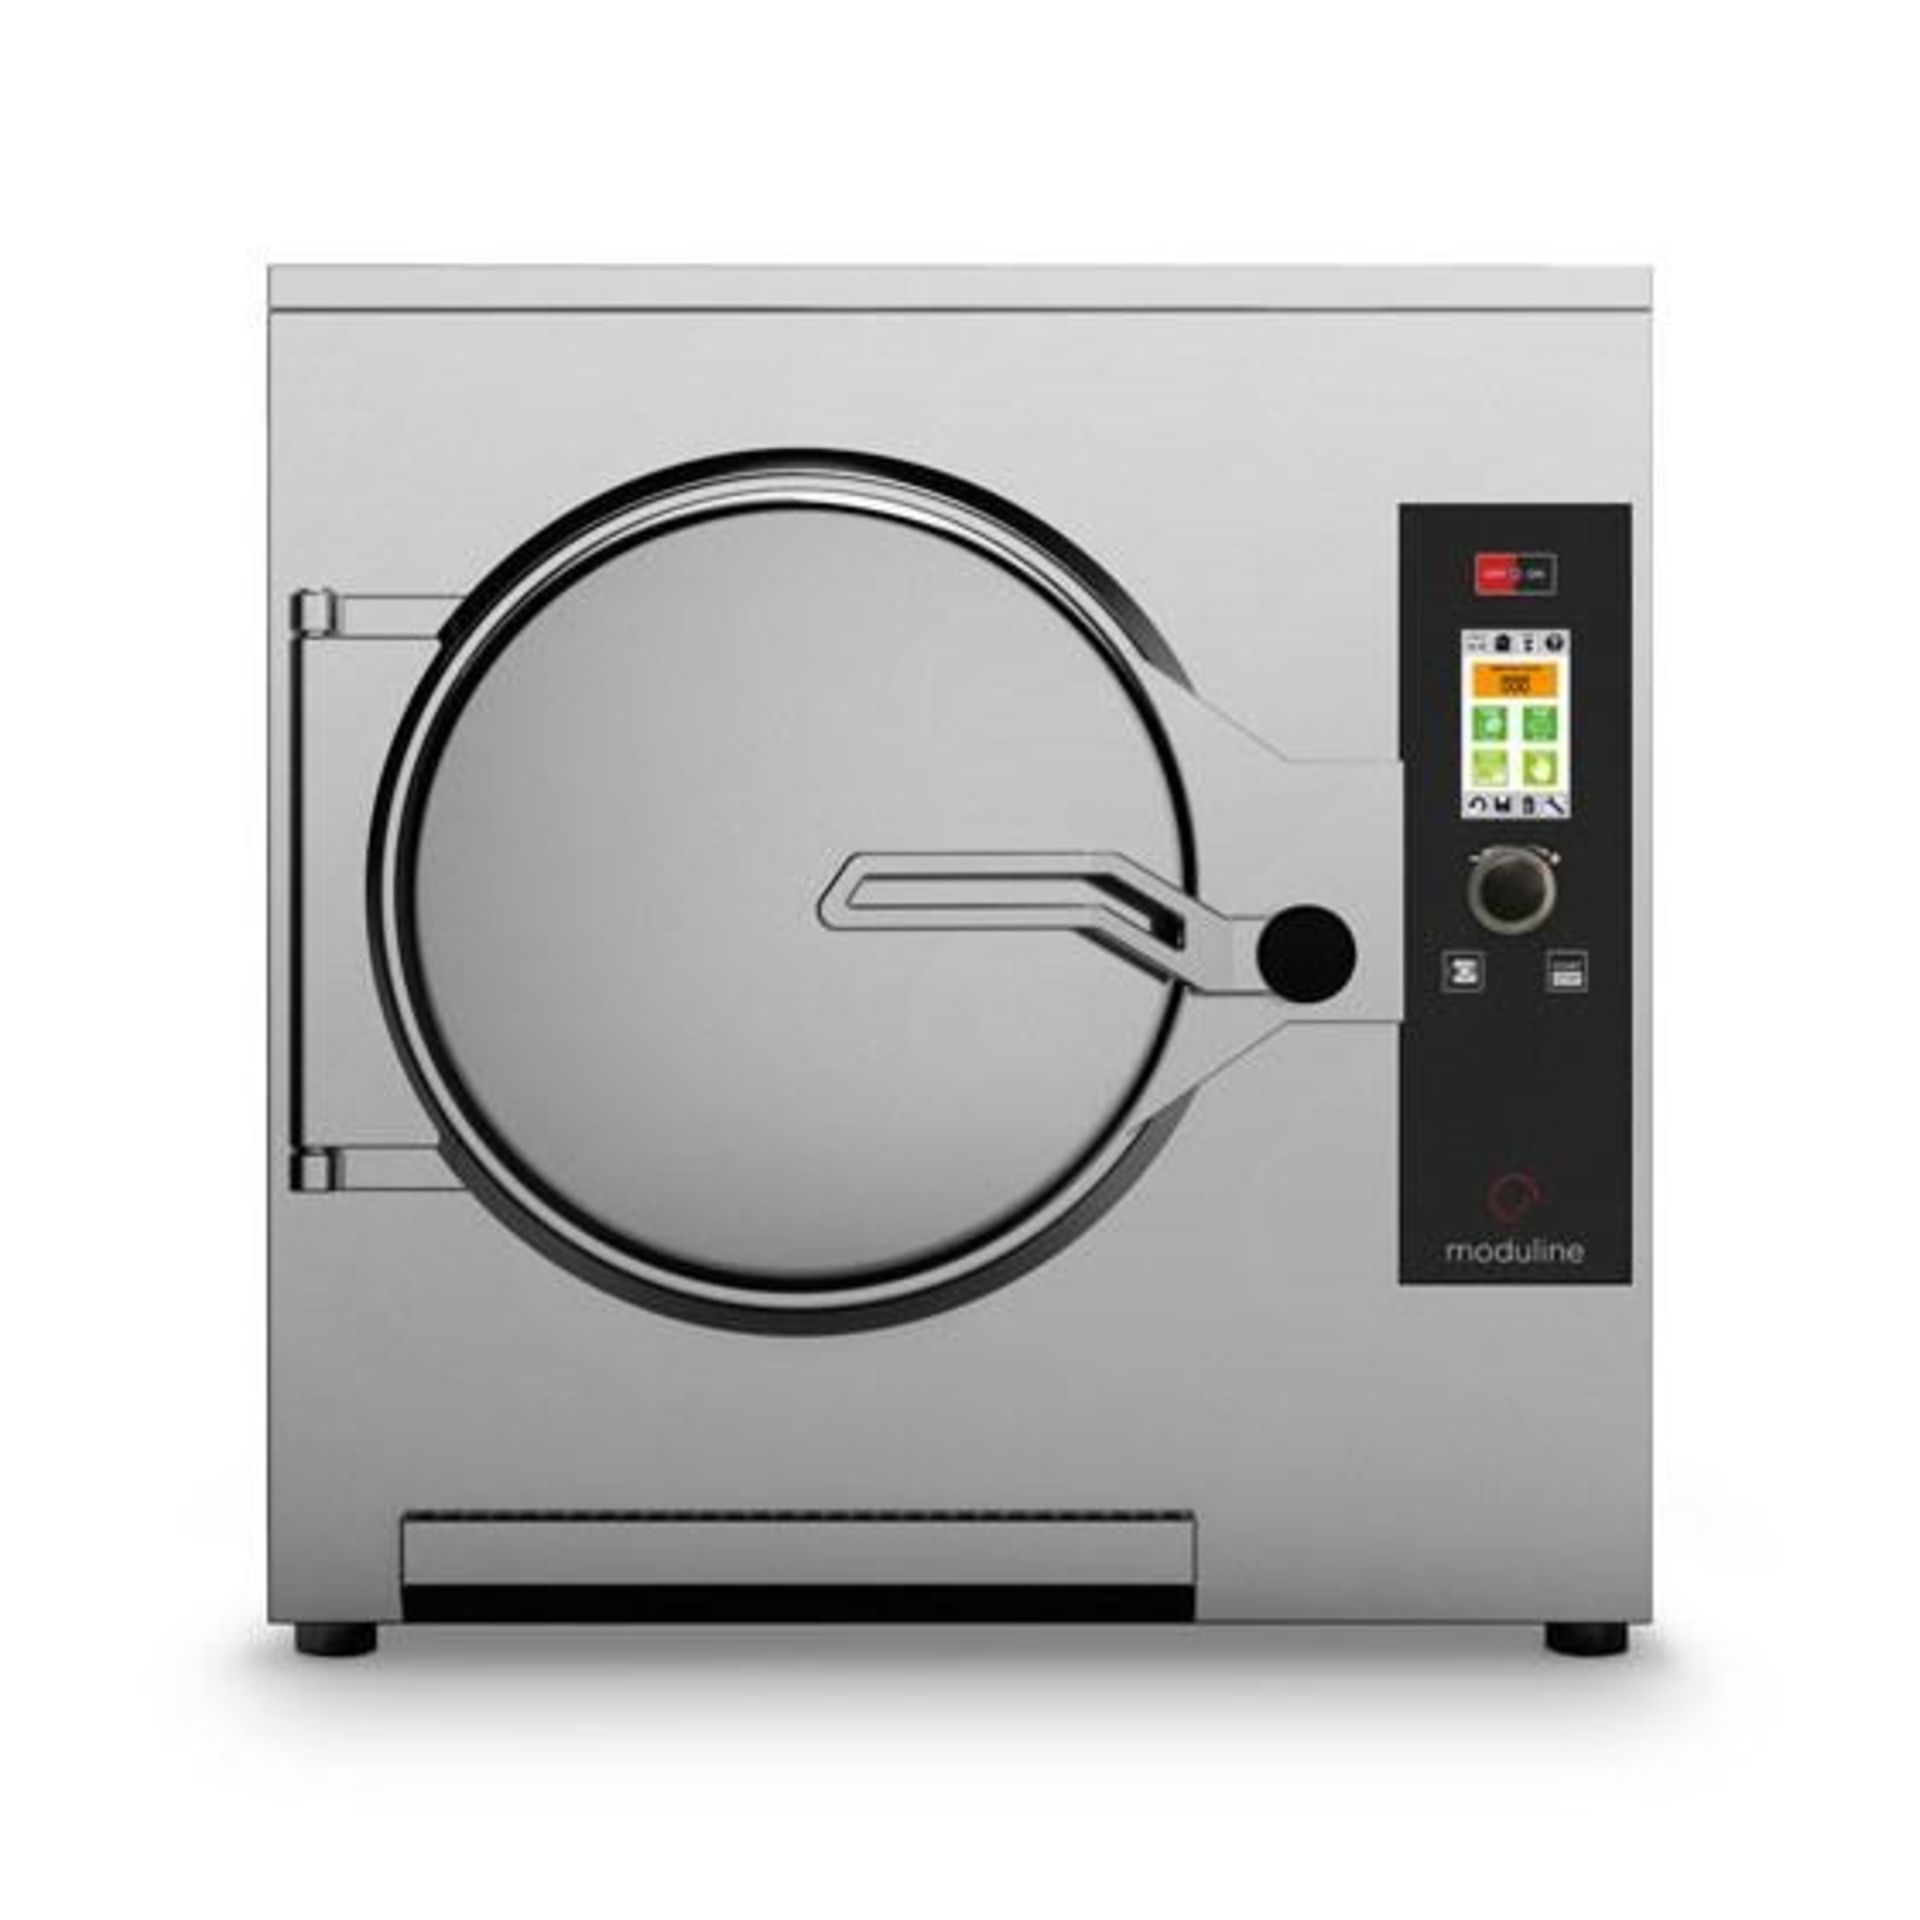 1 x Moduline Cook and Hold Convection Oven and Pressure Steamer Cooker - Features USB Connection, - Image 14 of 16